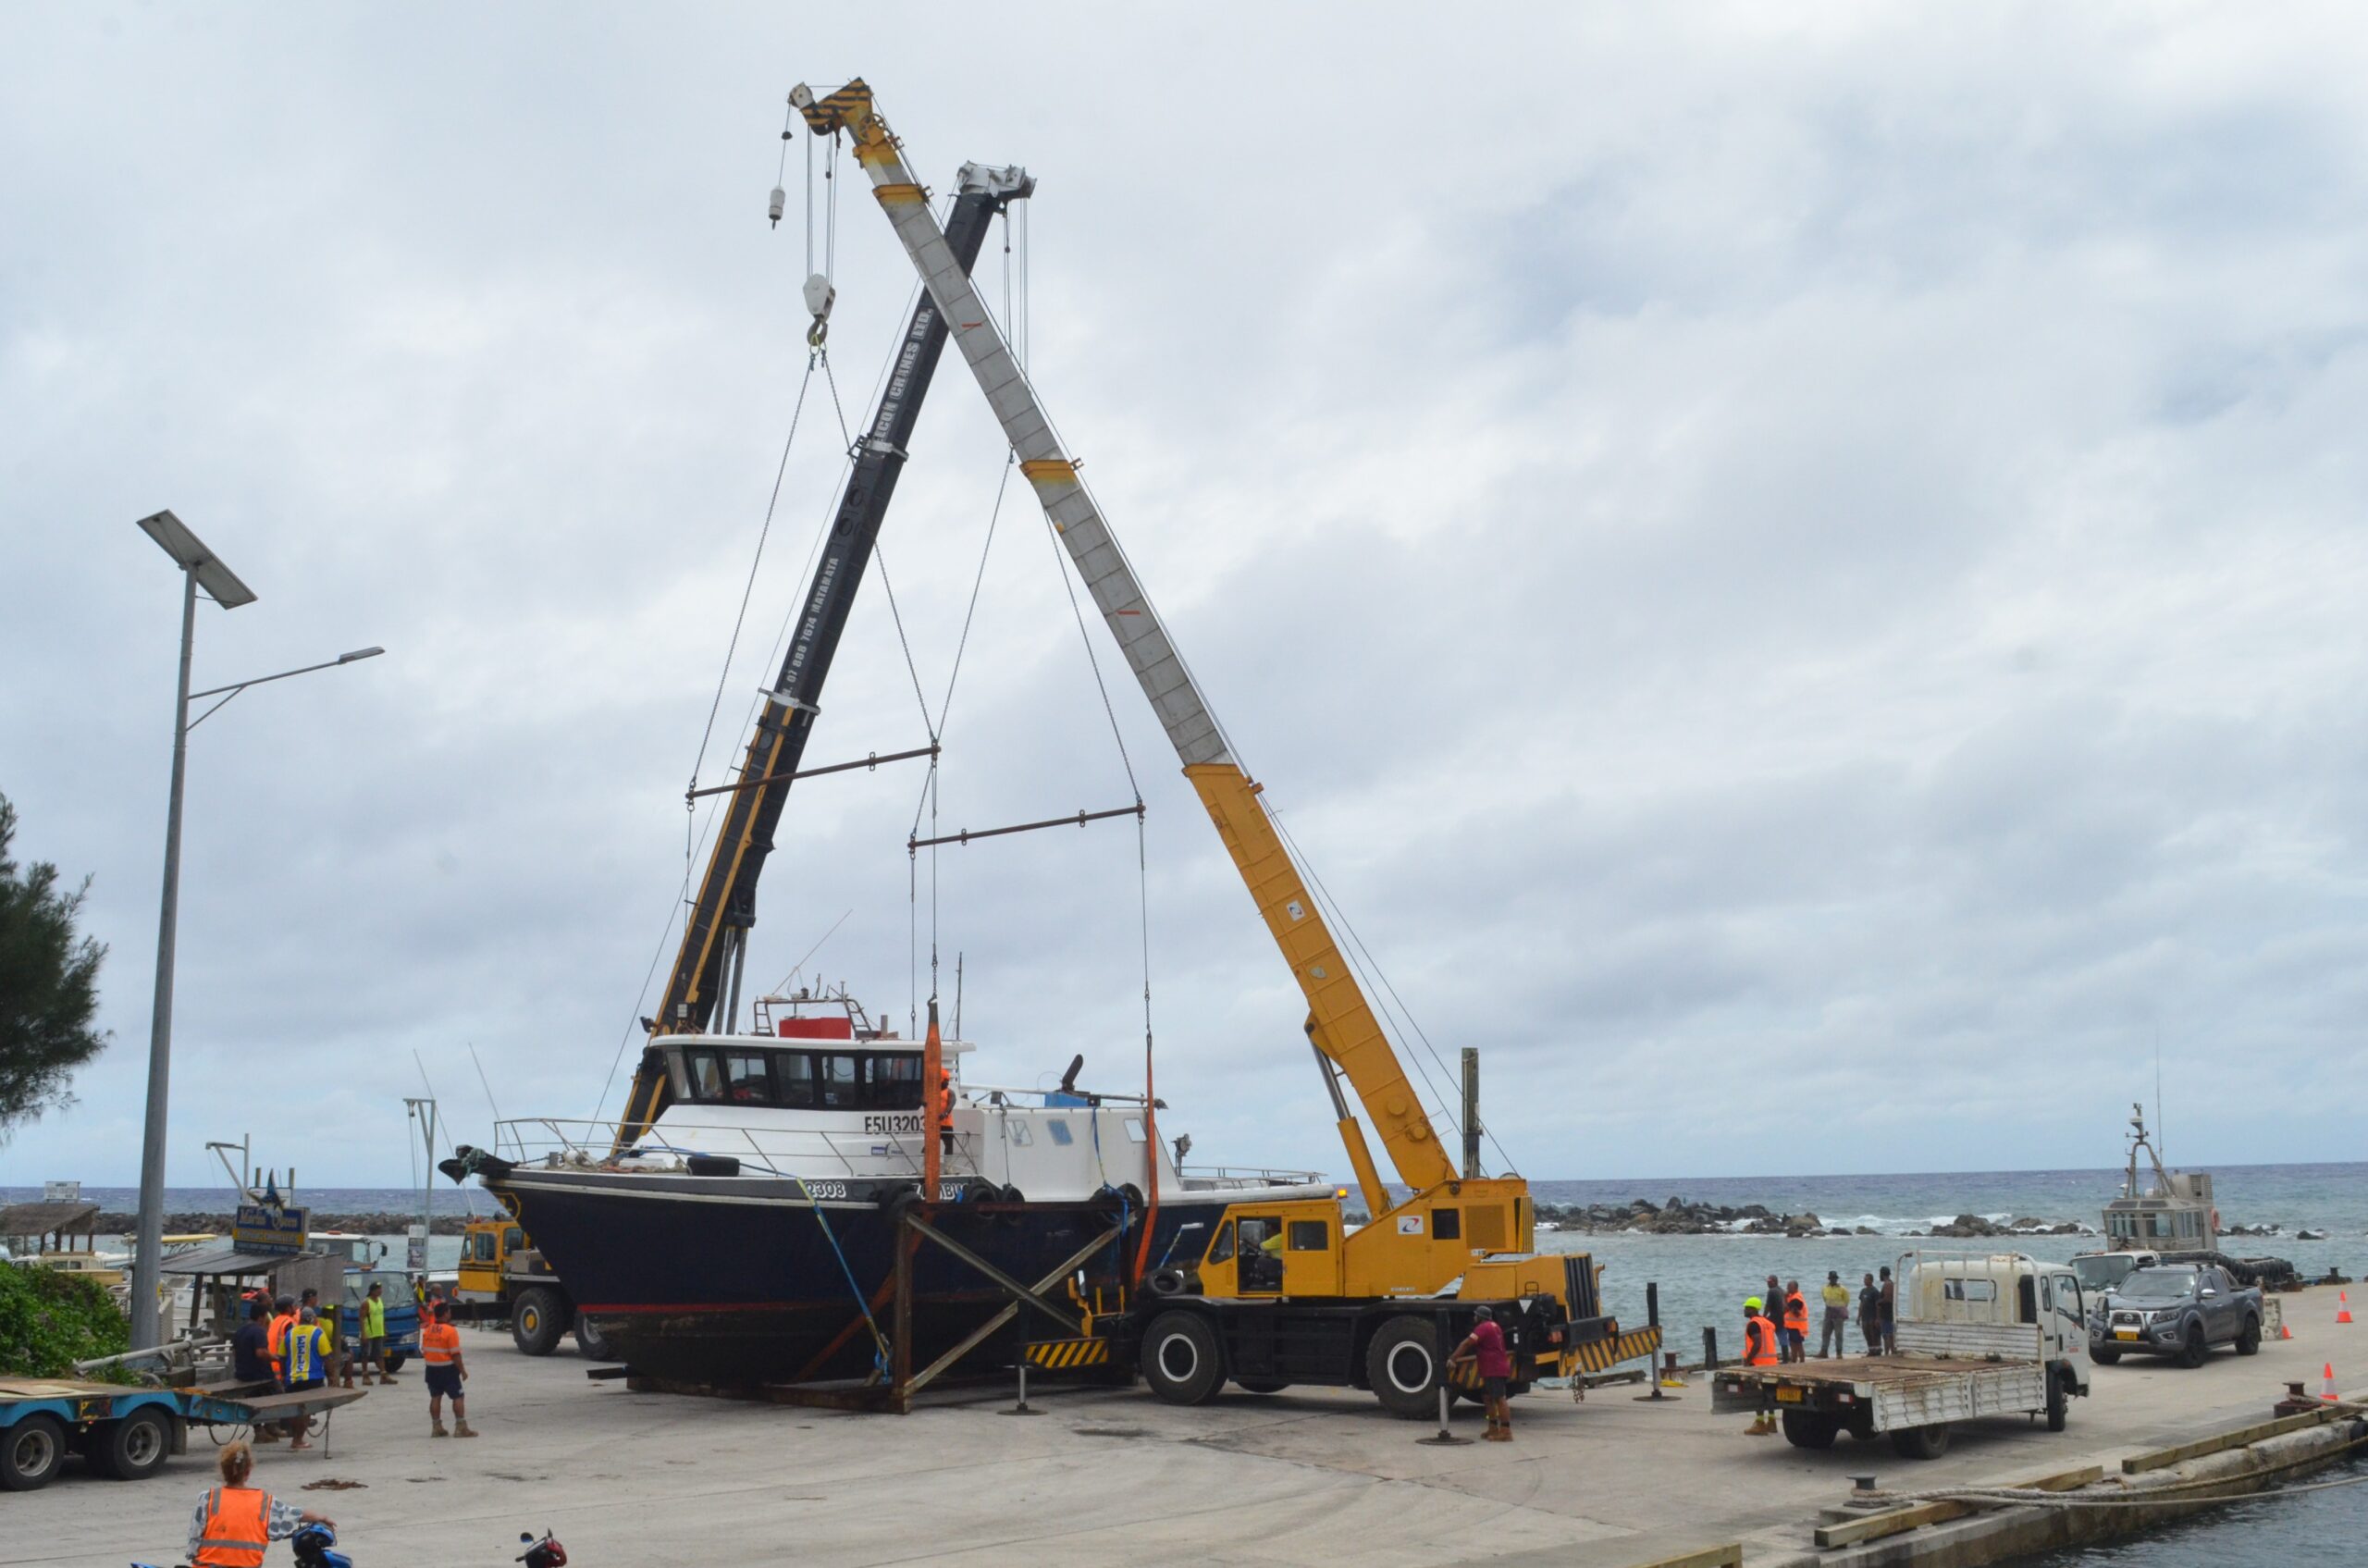 Fishing vessel Zambucca hauled out of water for inspection